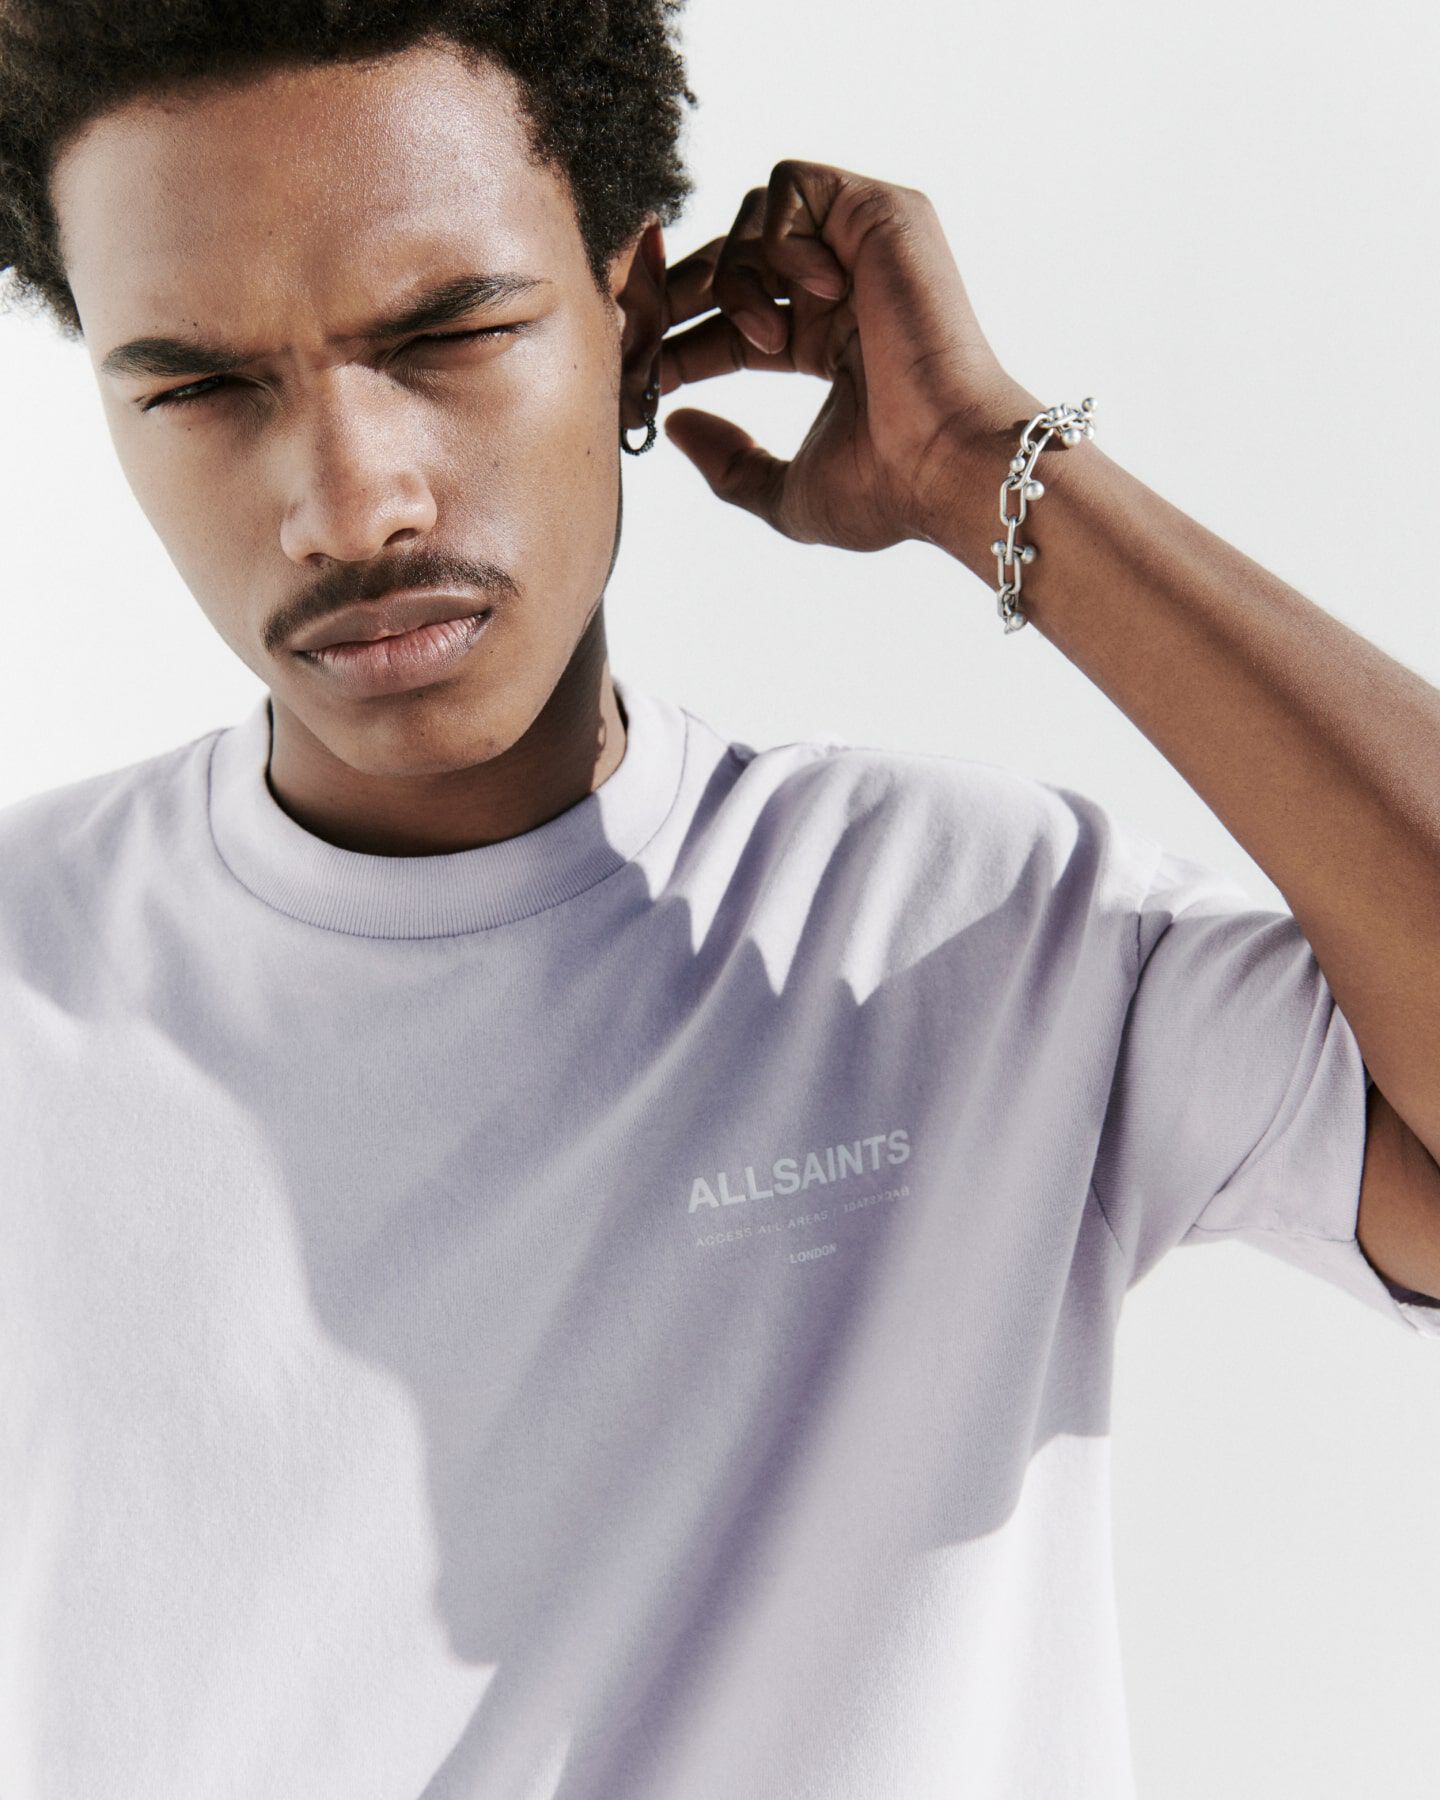 A man wearing a lilac t-shirt with AllSaints logo and a chain sterling silver bracelet touching his ear